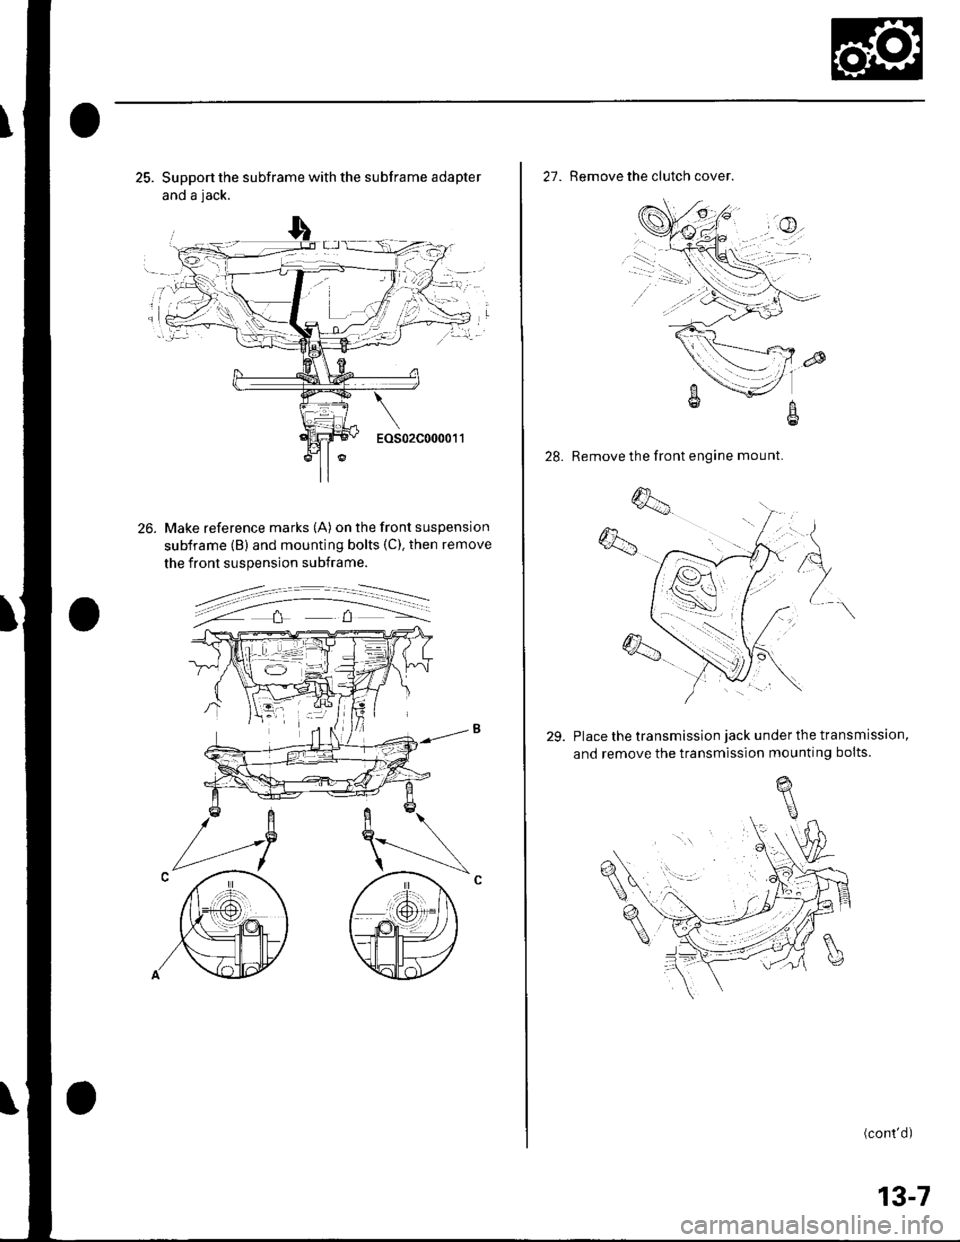 HONDA CIVIC 2002 7.G Owners Guide 25. Support the subframe with the subframe adapter
and a jack.
---
26.
EOS02C000011
Make reference marks (A) on the front suspension
subframe (B) and mounting bolts (C). then remove
the front suspensi